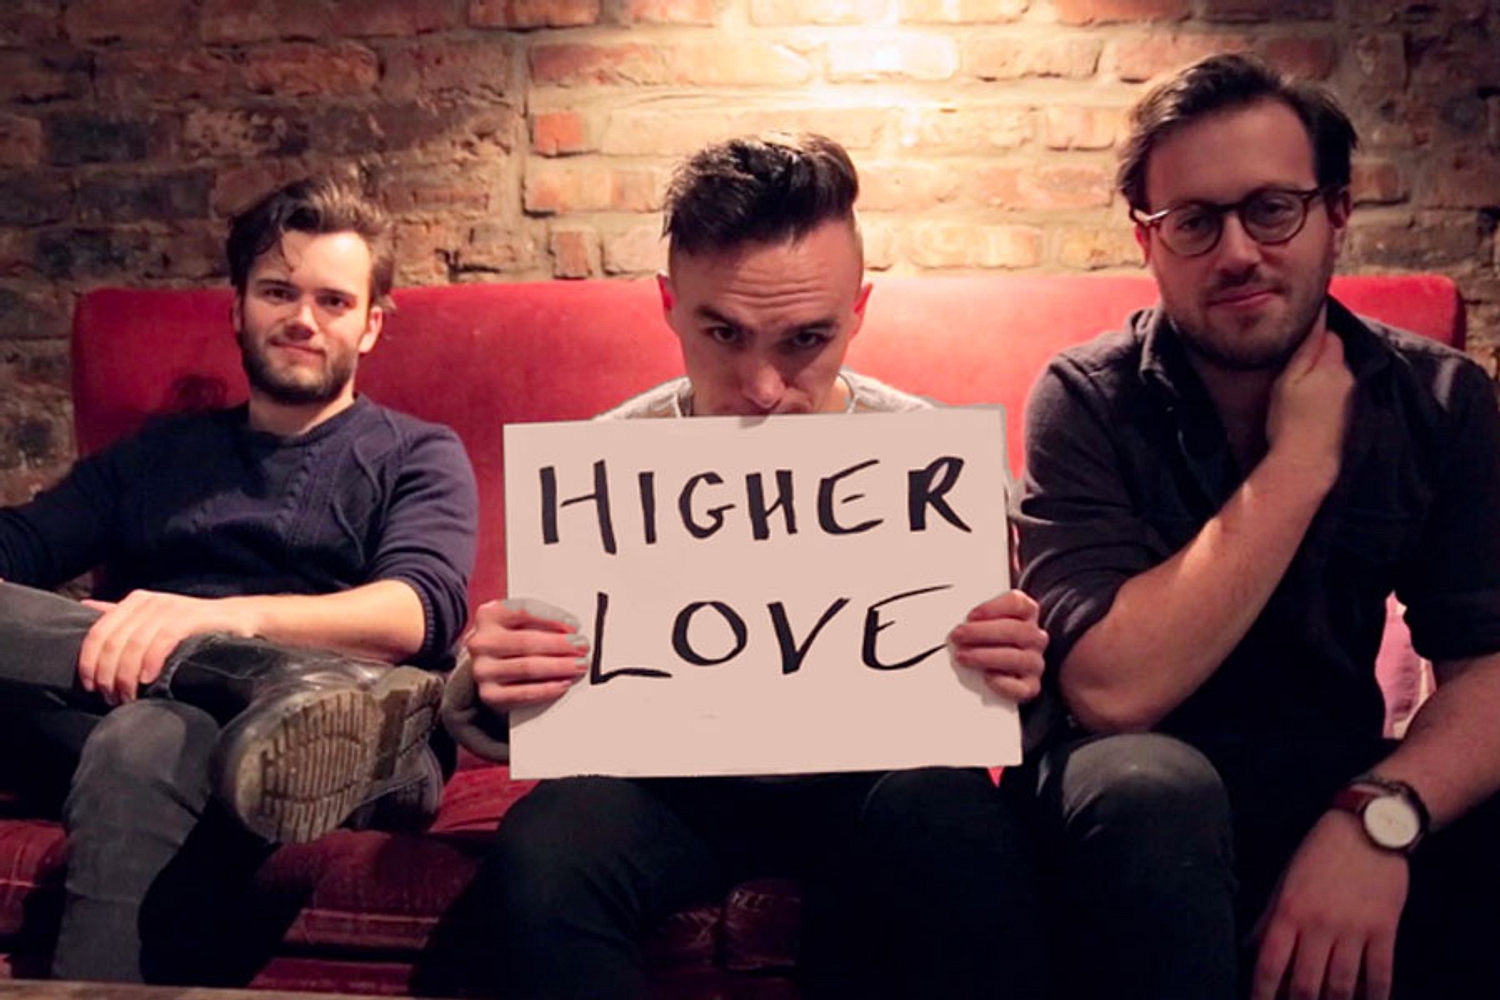 Prides unveil new track ‘Higher Love’